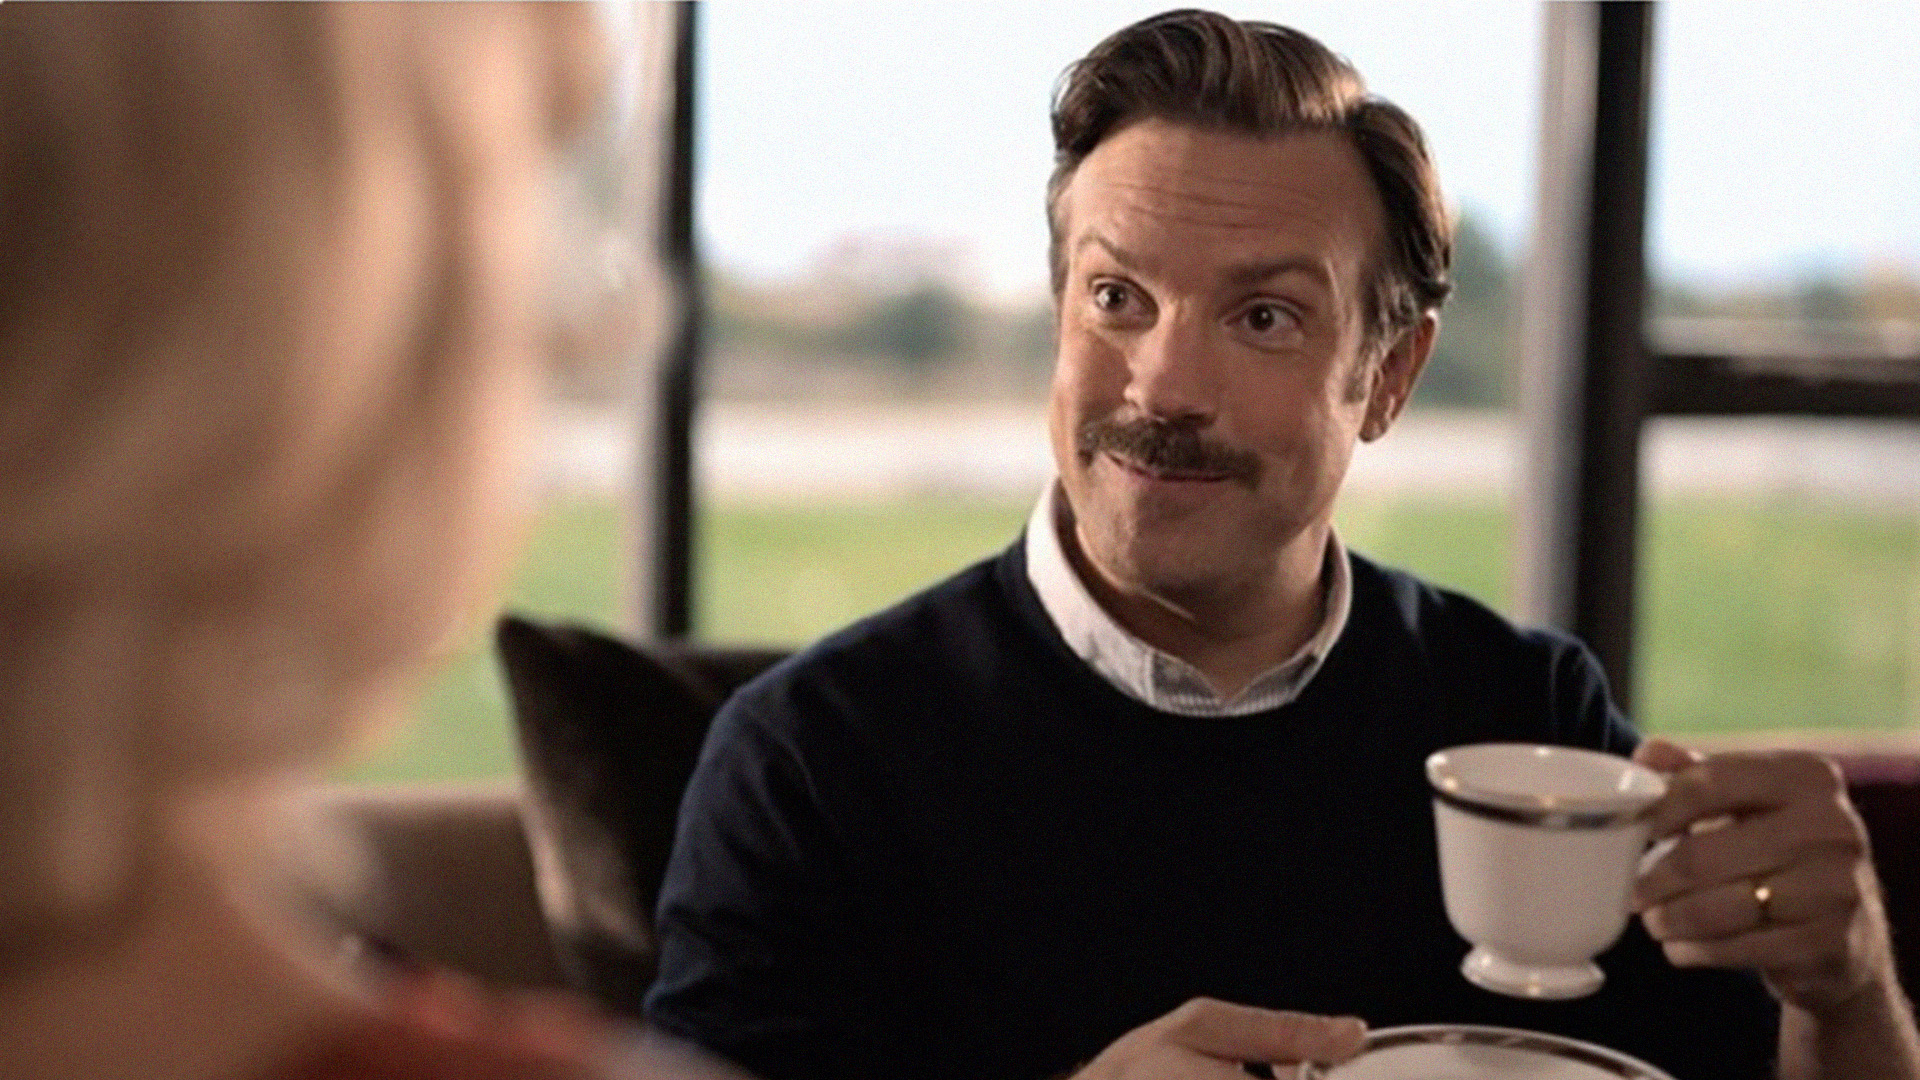 Will Ted & Rebecca Get Together in Ted Lasso Season 3?